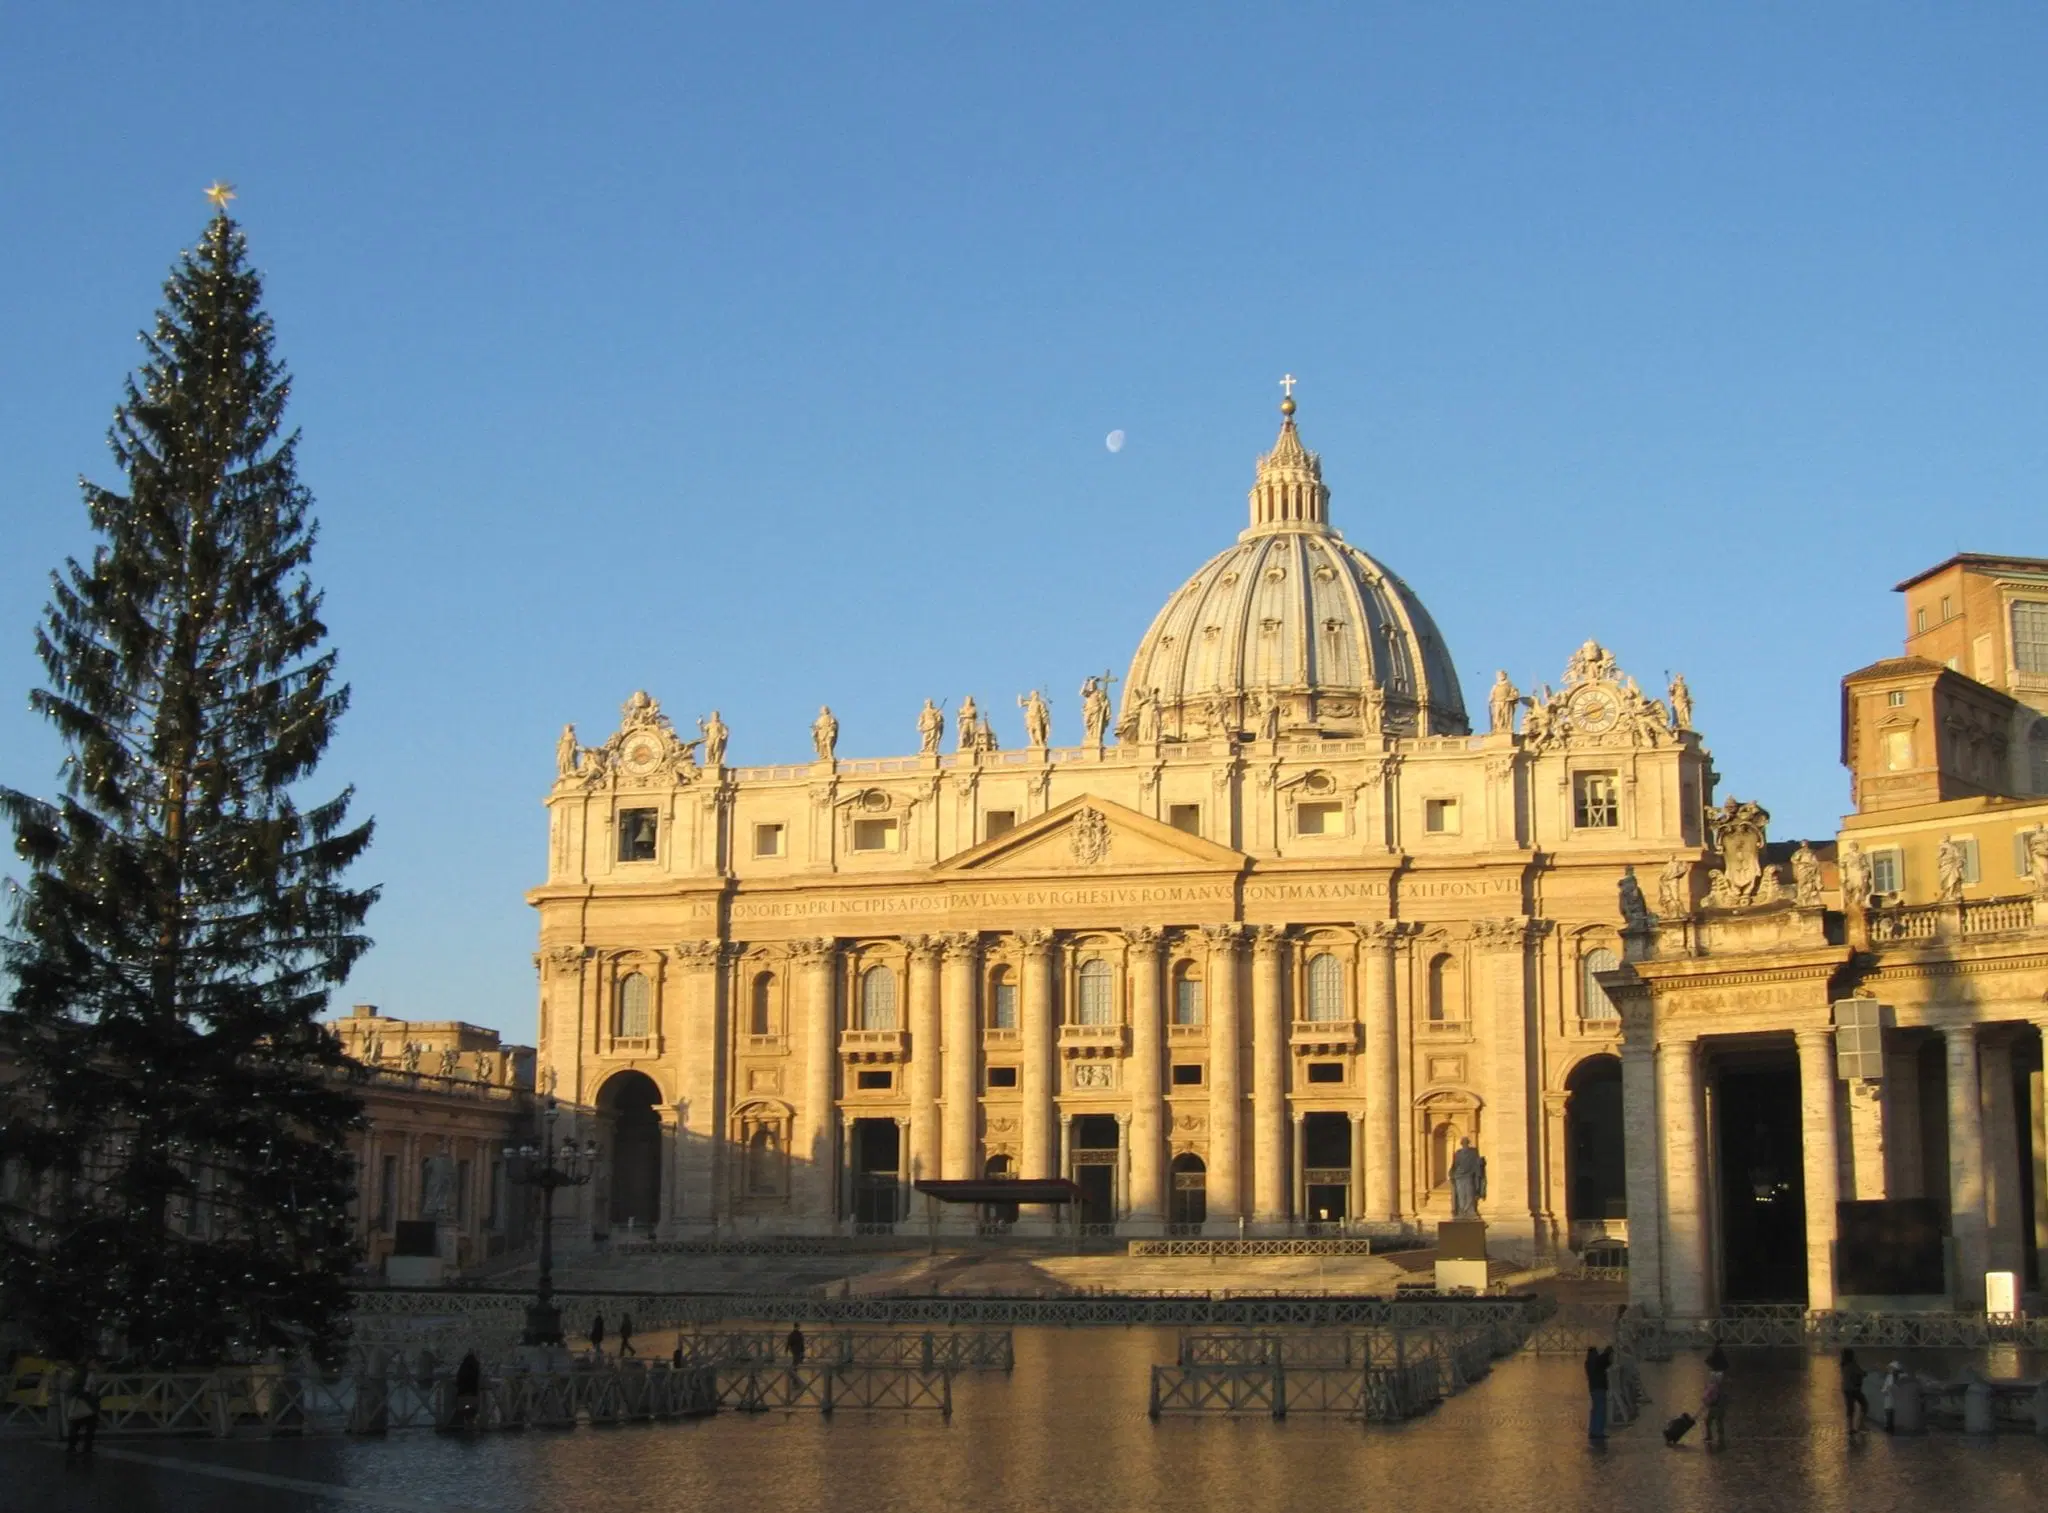 How Old Is St. Peter's Basilica